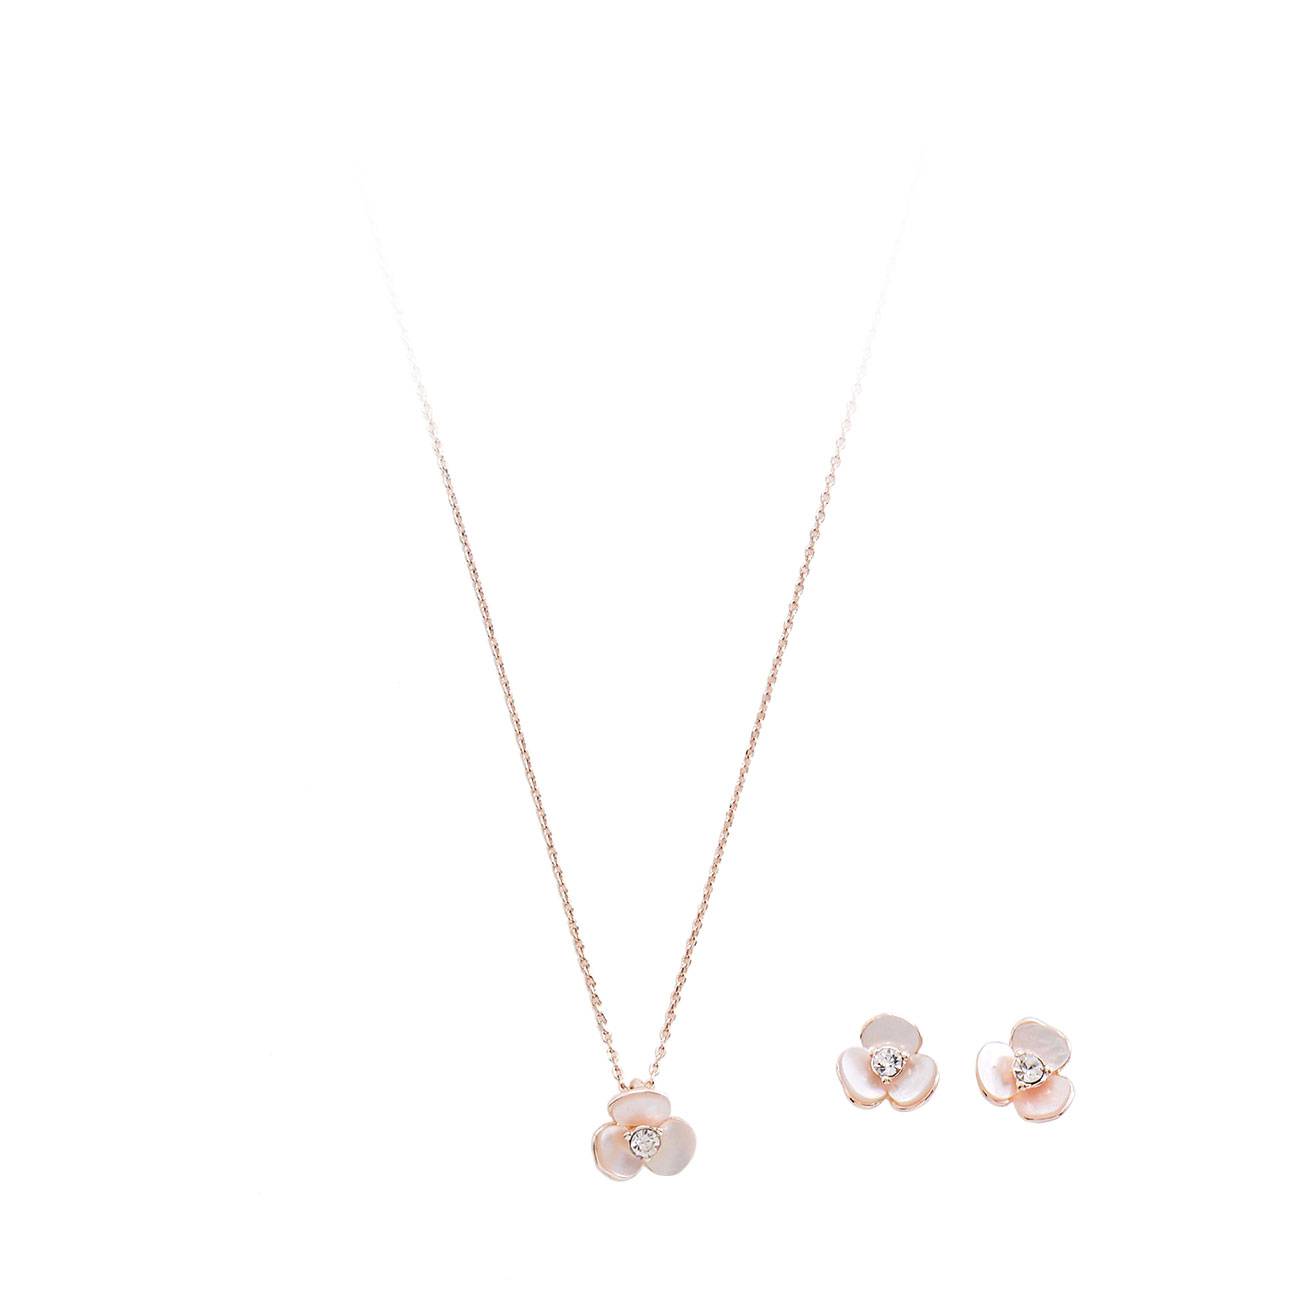 MOTHER OF PEARL ROSE GOLD FLOWER SET S1162